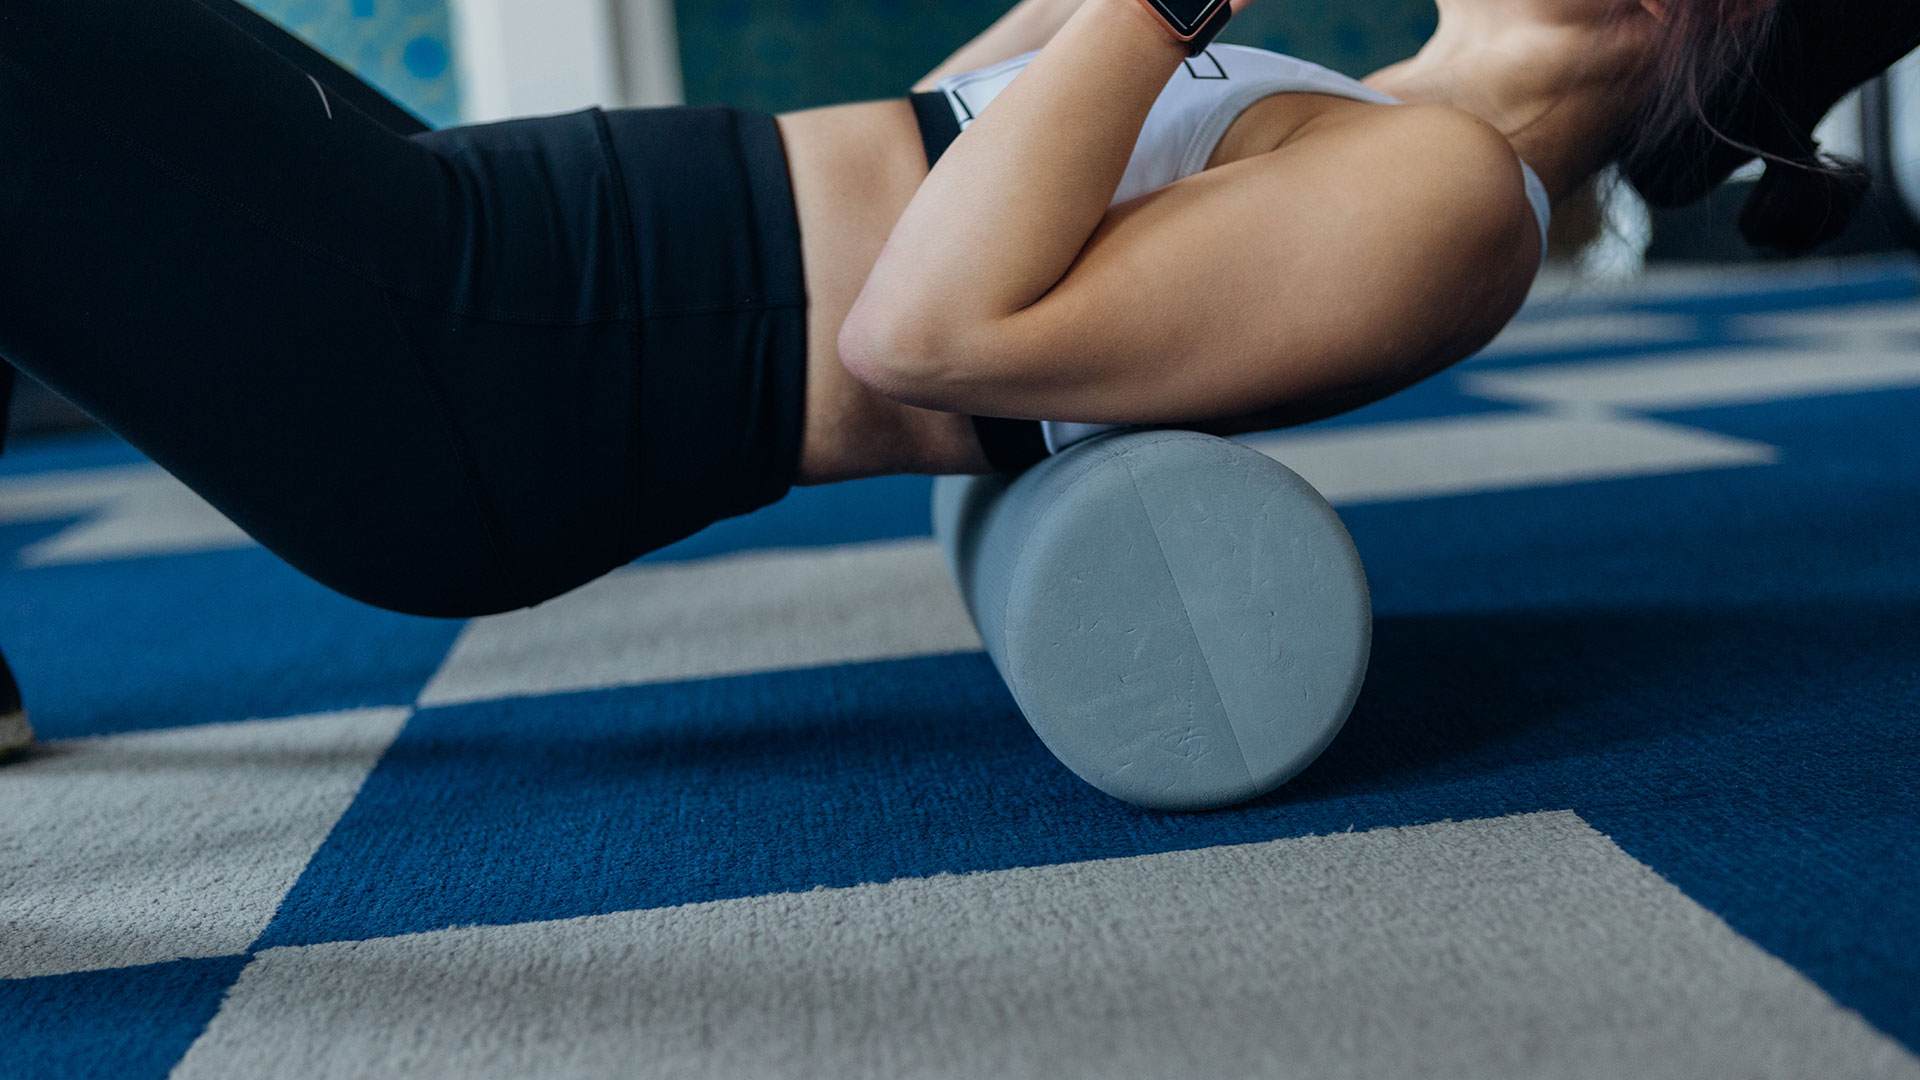 Chest extension on a foam roller (Gettyimages)